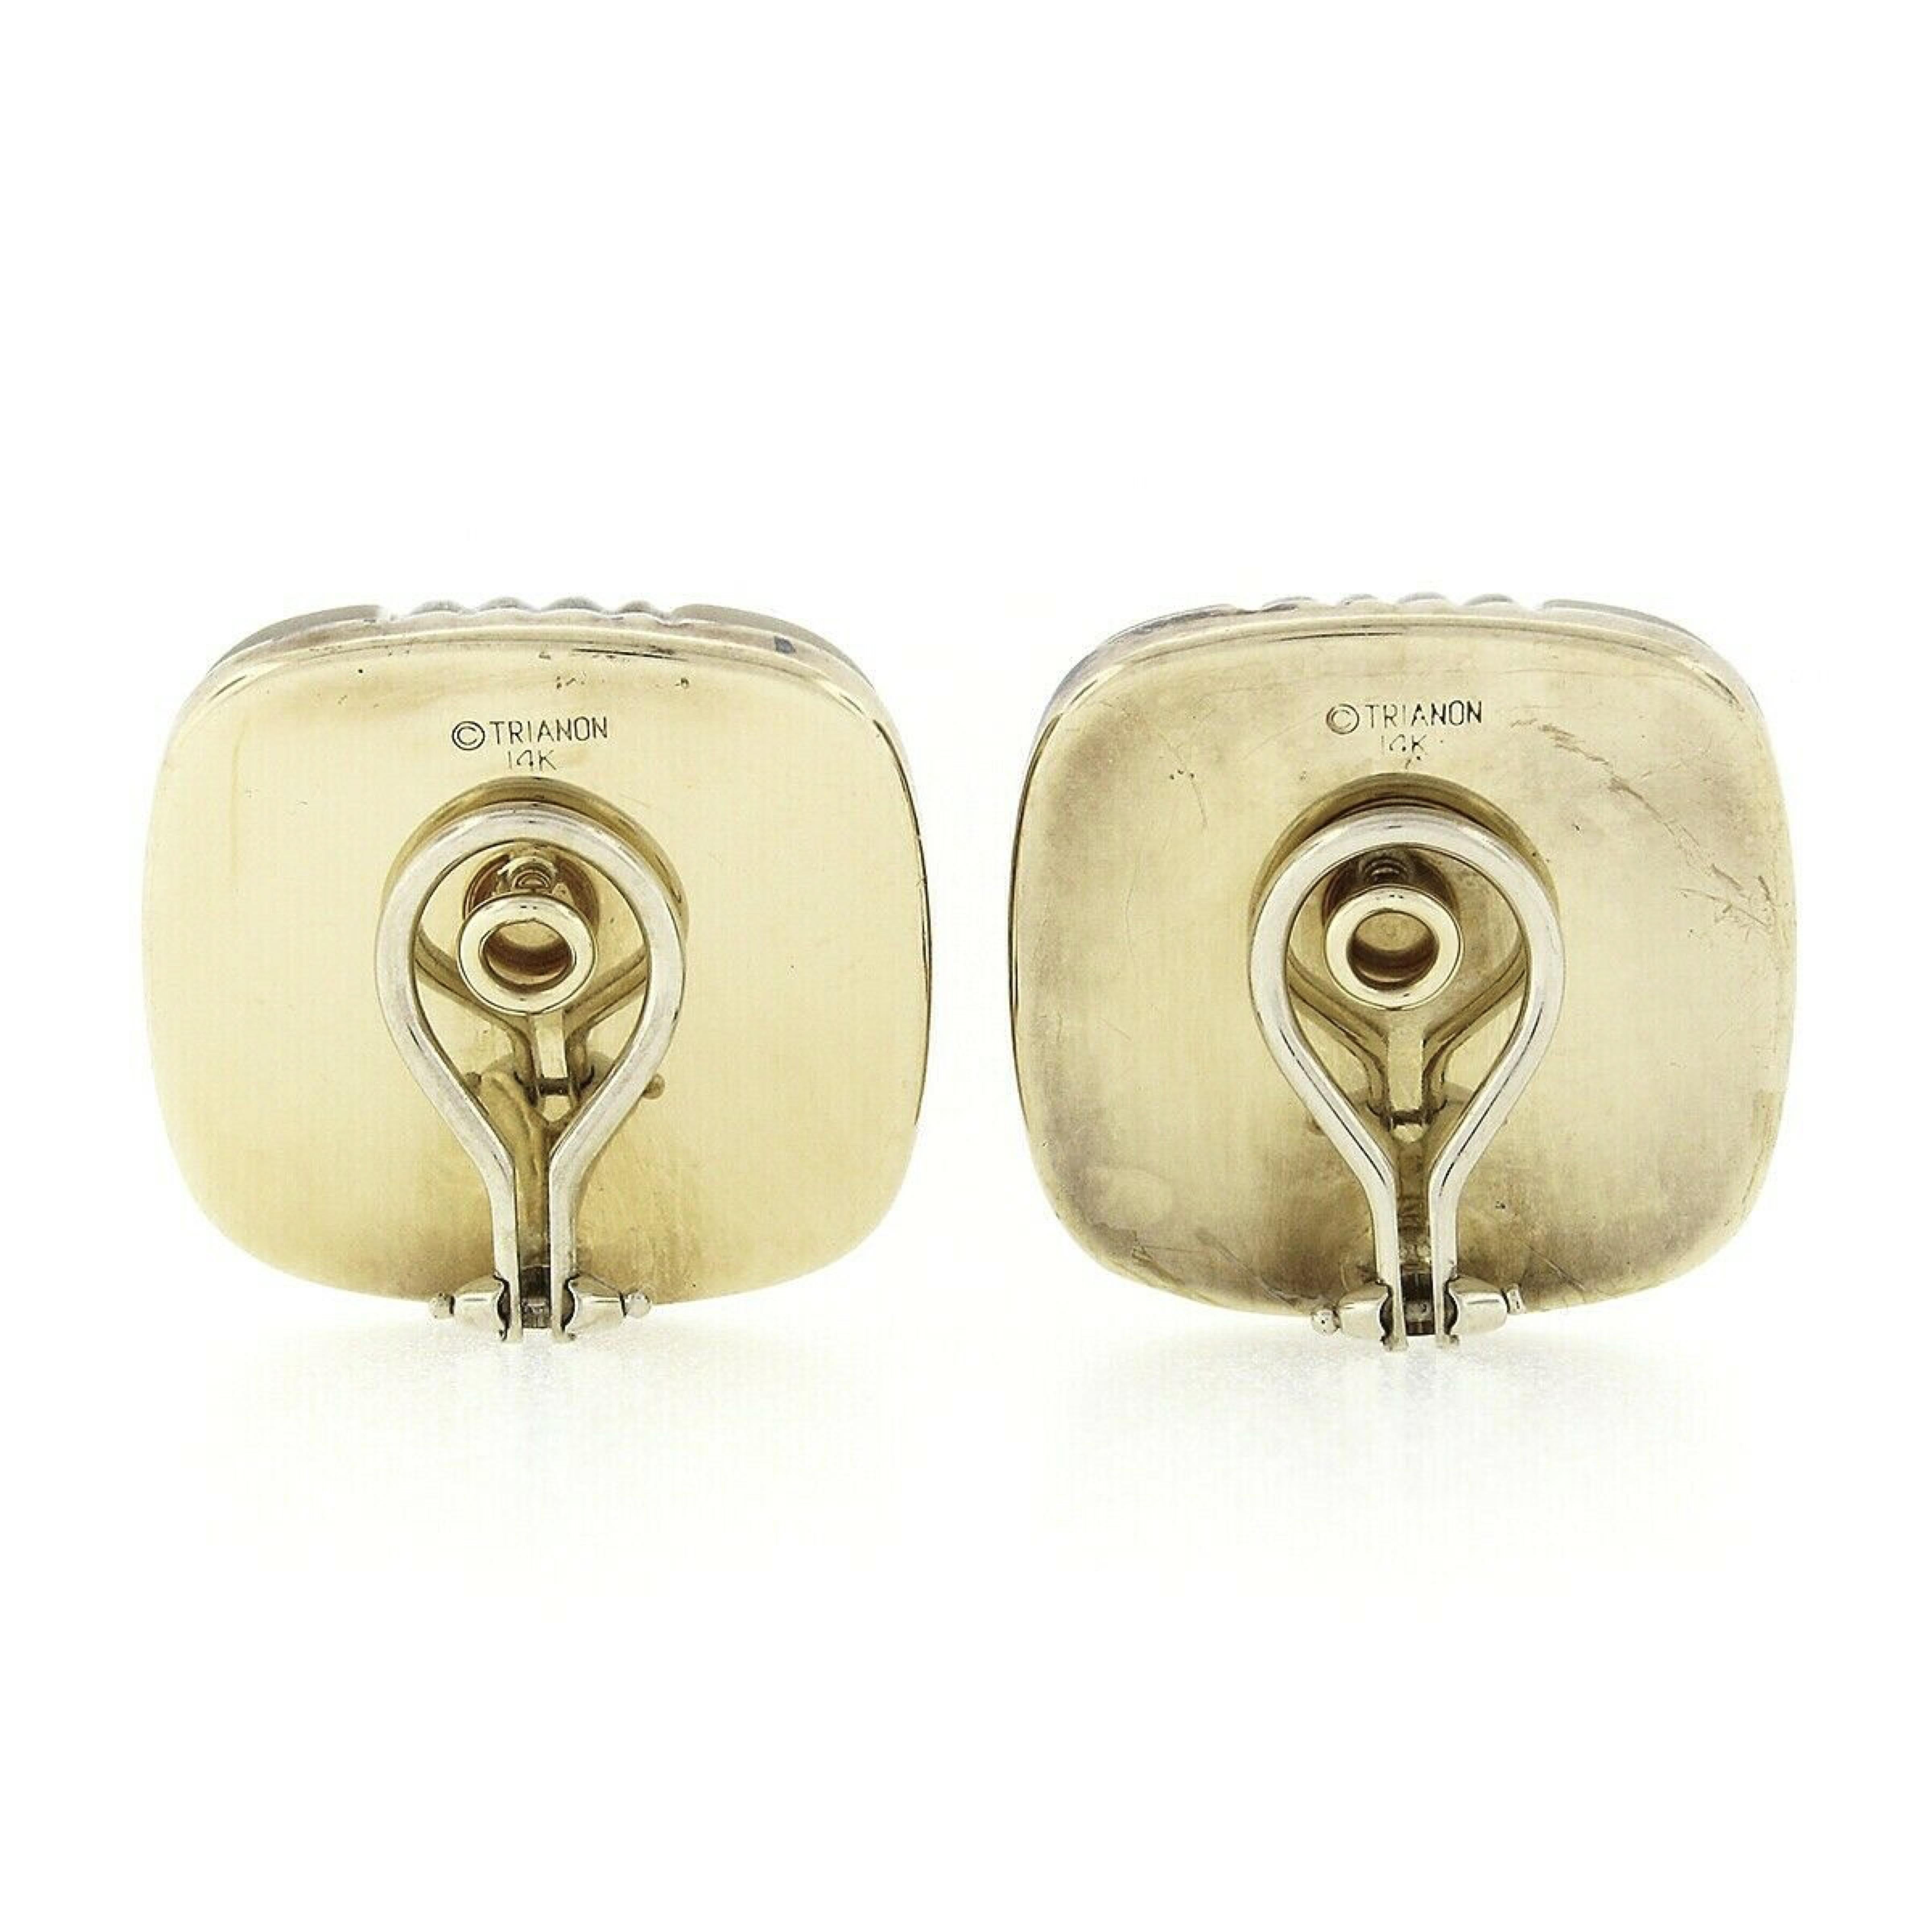 Here we have a gorgeous pair of vintage designer earrings that were crafted from solid 14k yellow and white gold by Trianon. The earrings each feature a large, domed, square cushion cut piece of natural quartz that measures approximately 23.5mm